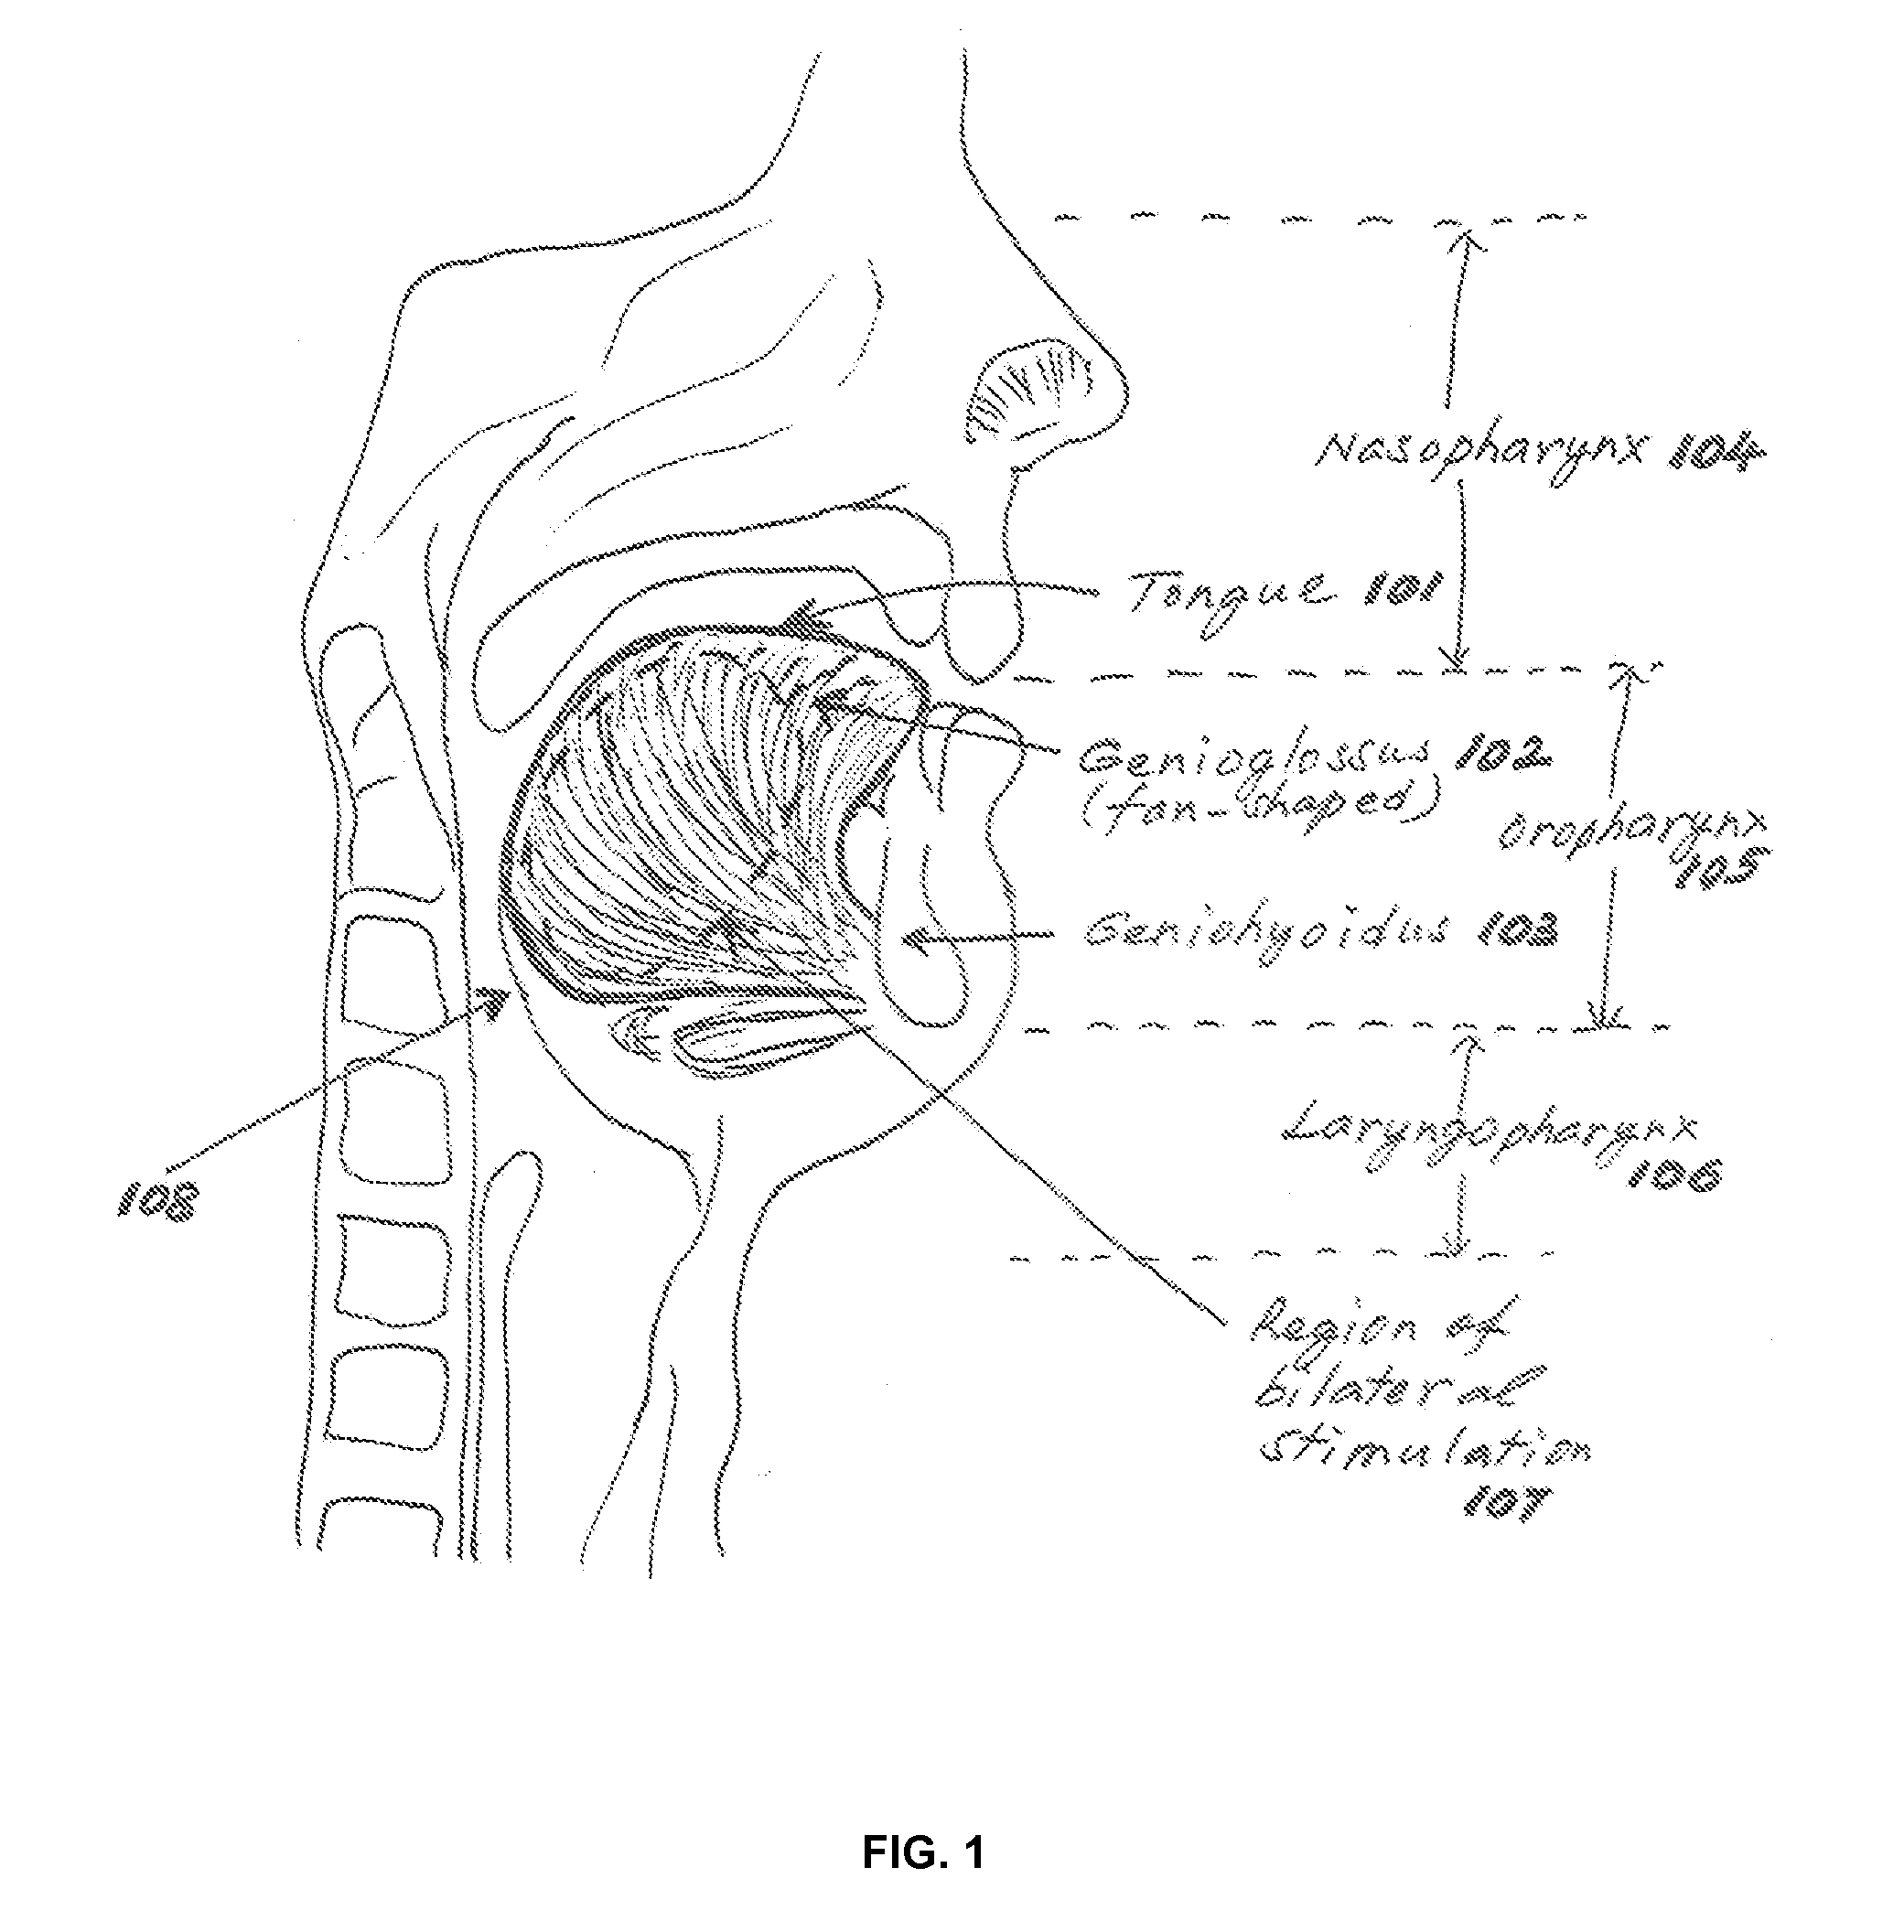 Non-invasive intraoral electrical stimulator system and method for treatment of obstructive sleep apnea (OSA)